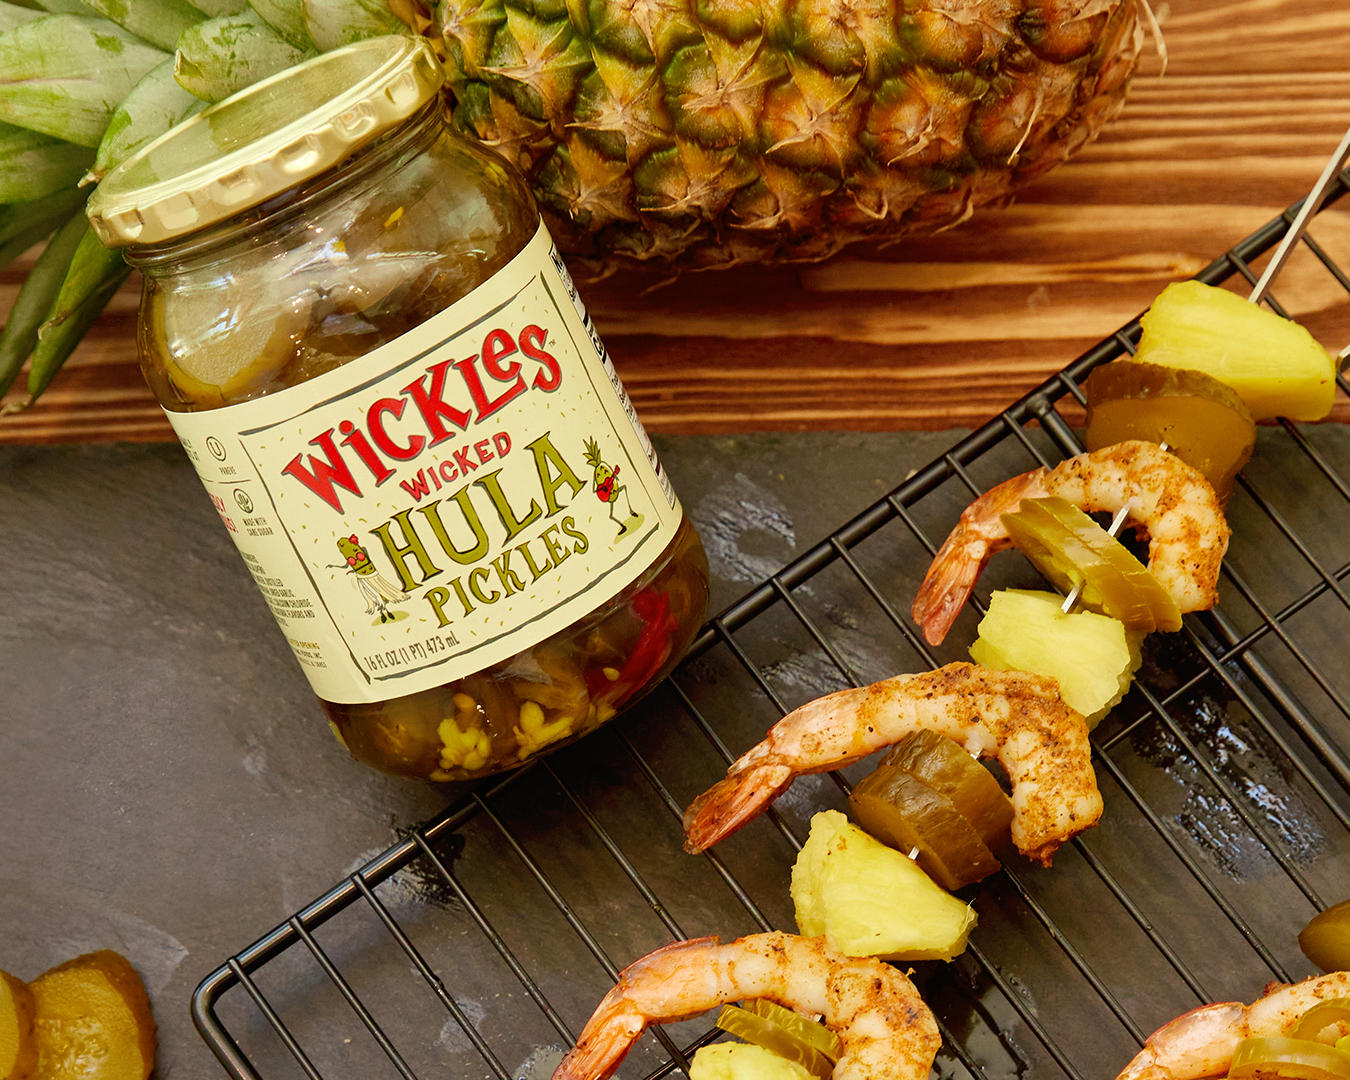 wicked hula shrimp kebabs sitting on grill grate next to a jar of wickles hula pickles